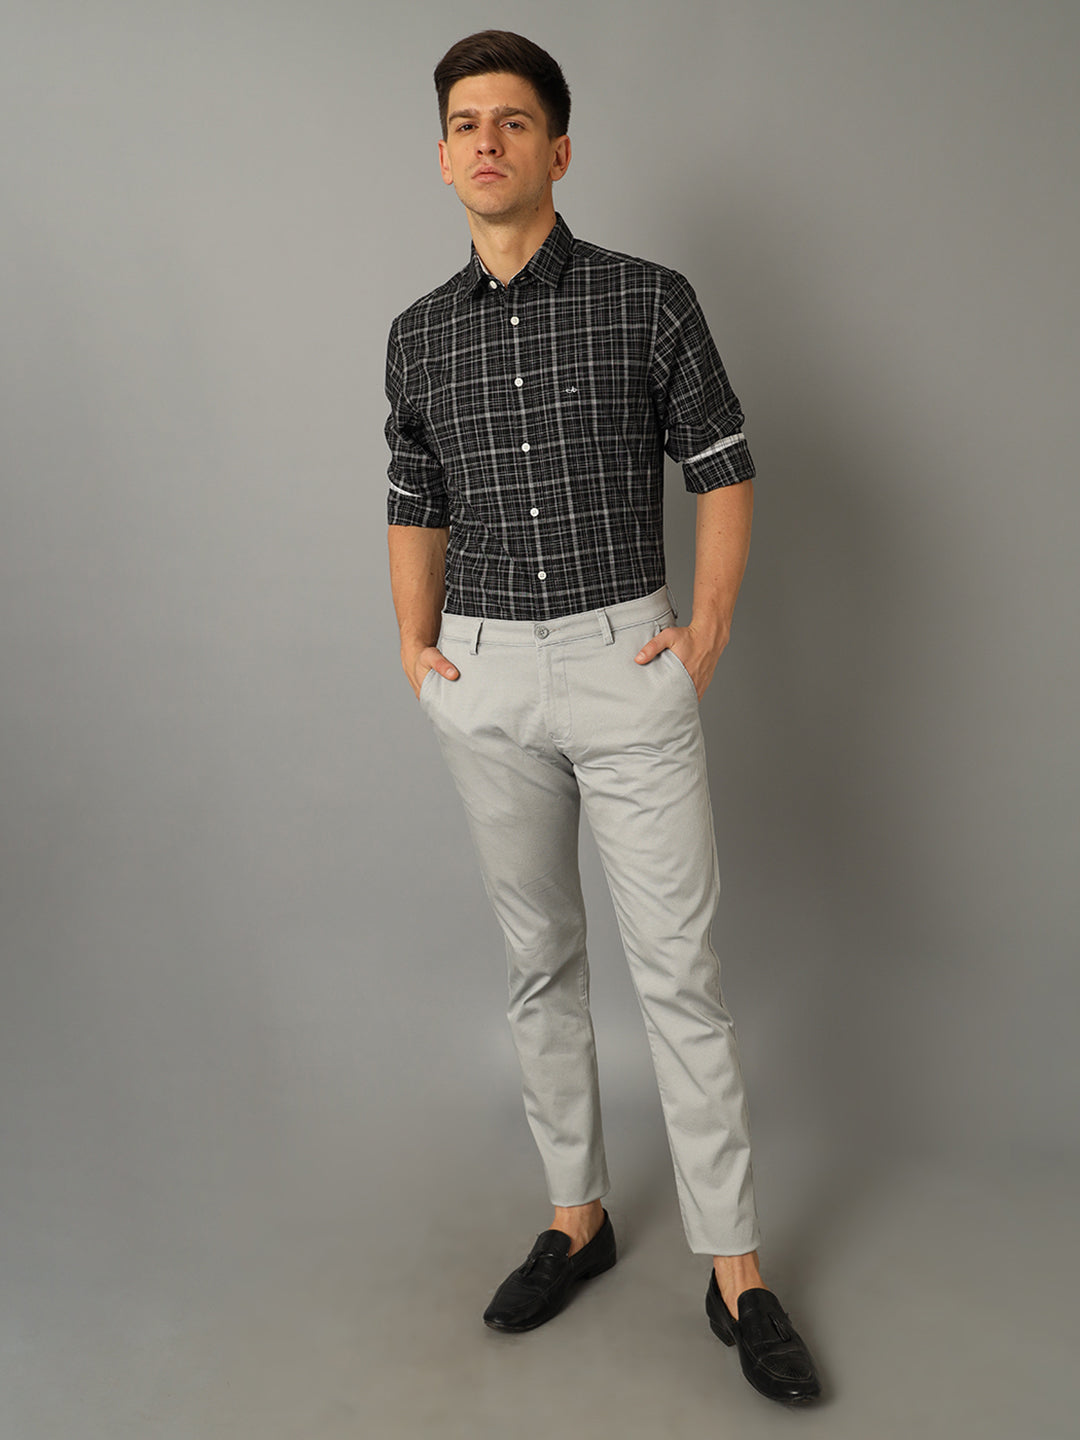 Men's Guide To Styling White Denim Outfits Correctly | White denim outfit,  Printed shirt outfit, Smart casual dress code